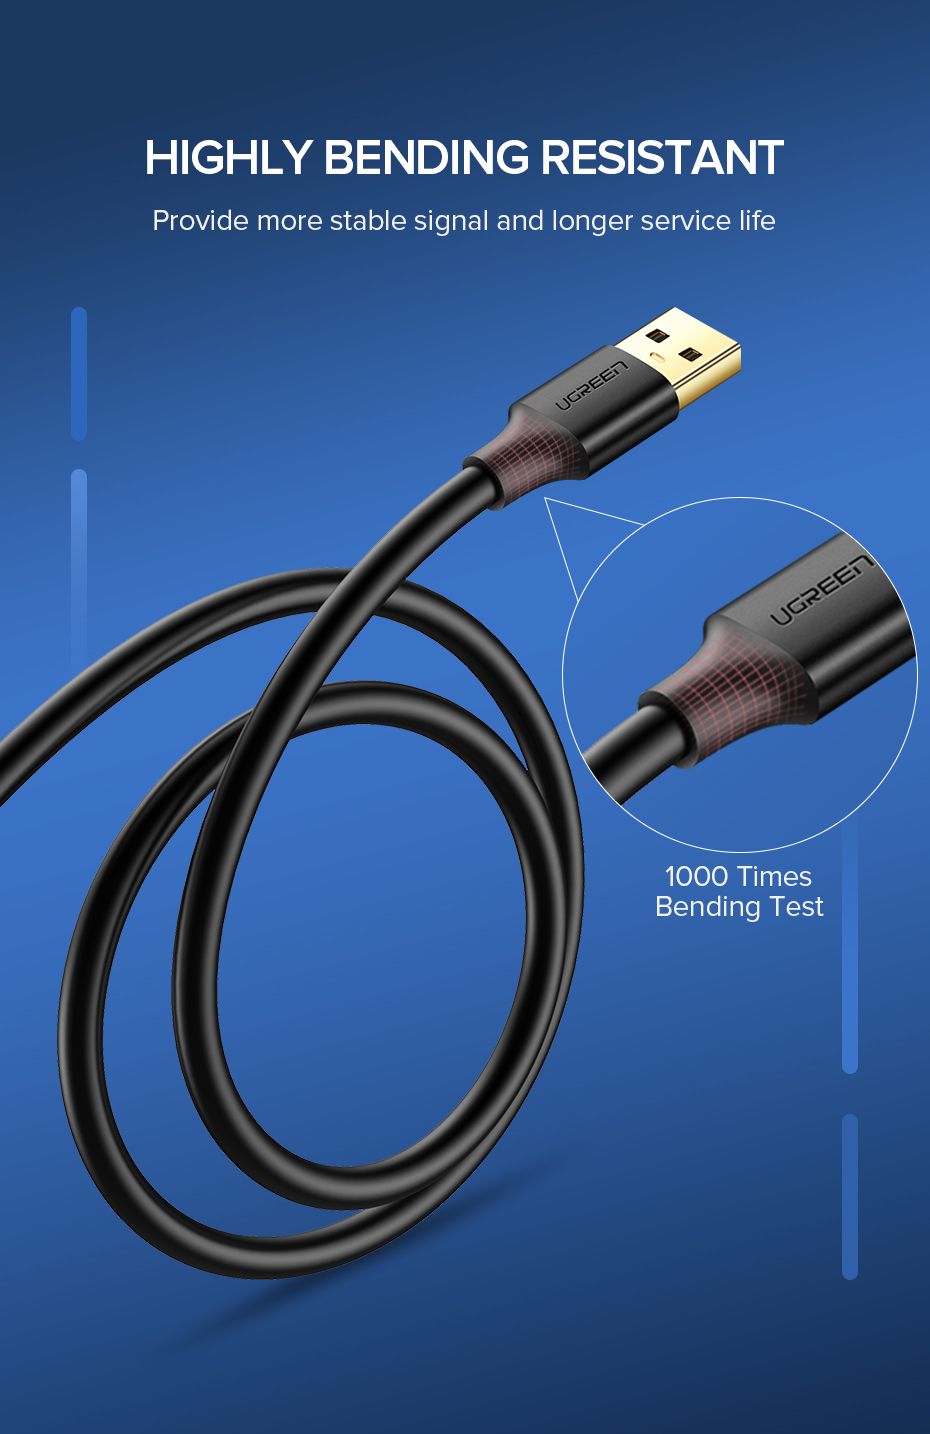 Ugreen-USB-to-USB-Extension-Cable-Data-Cable-Type-A-Male-to-Male-USB-20-Extender-for-Radiator-Hard-D-1645676